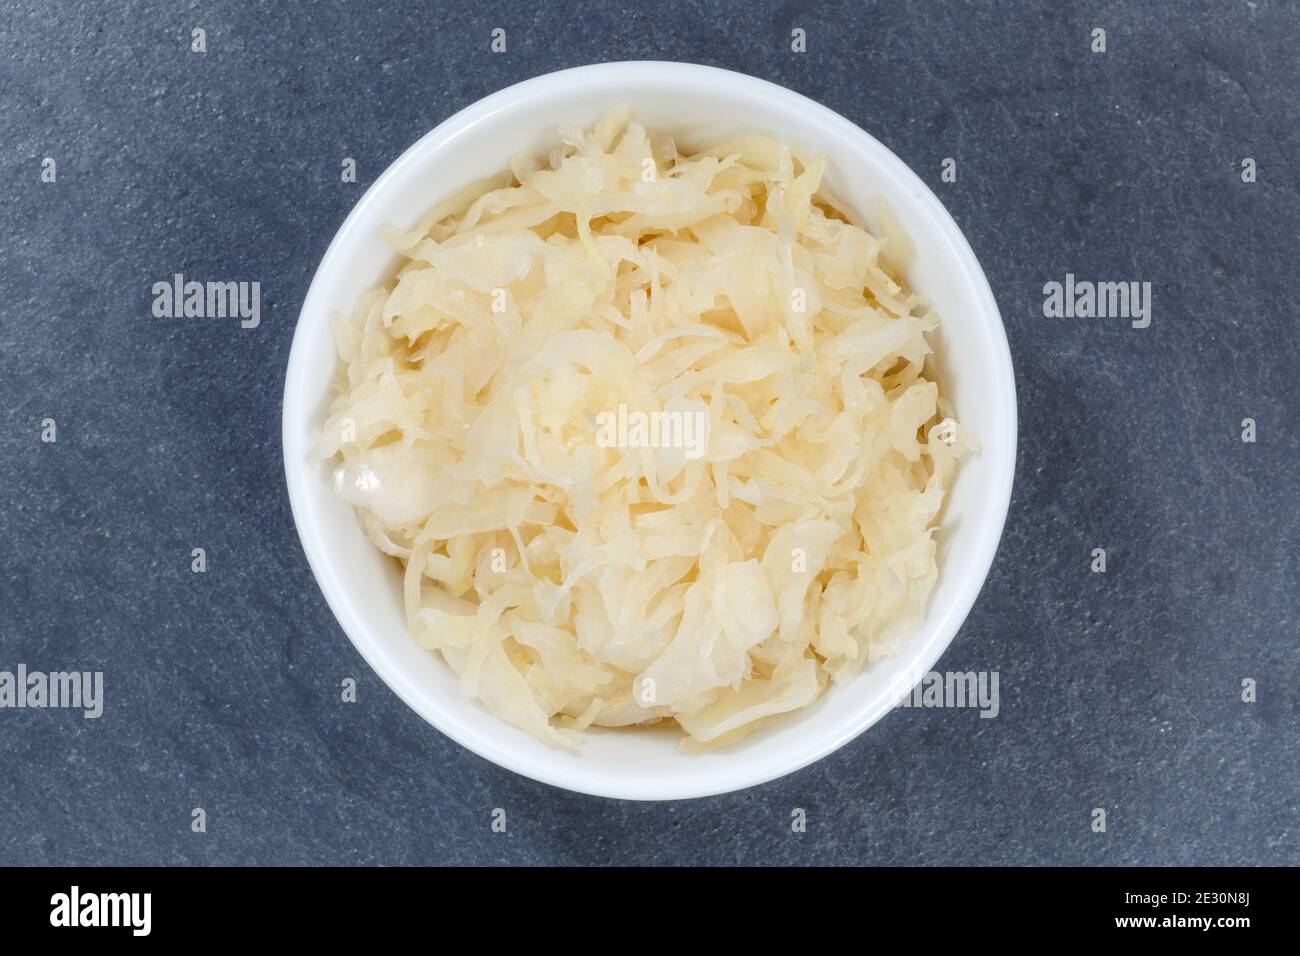 Sauerkraut coleslaw cabbage sliced from above bowl on a slate top view Stock Photo